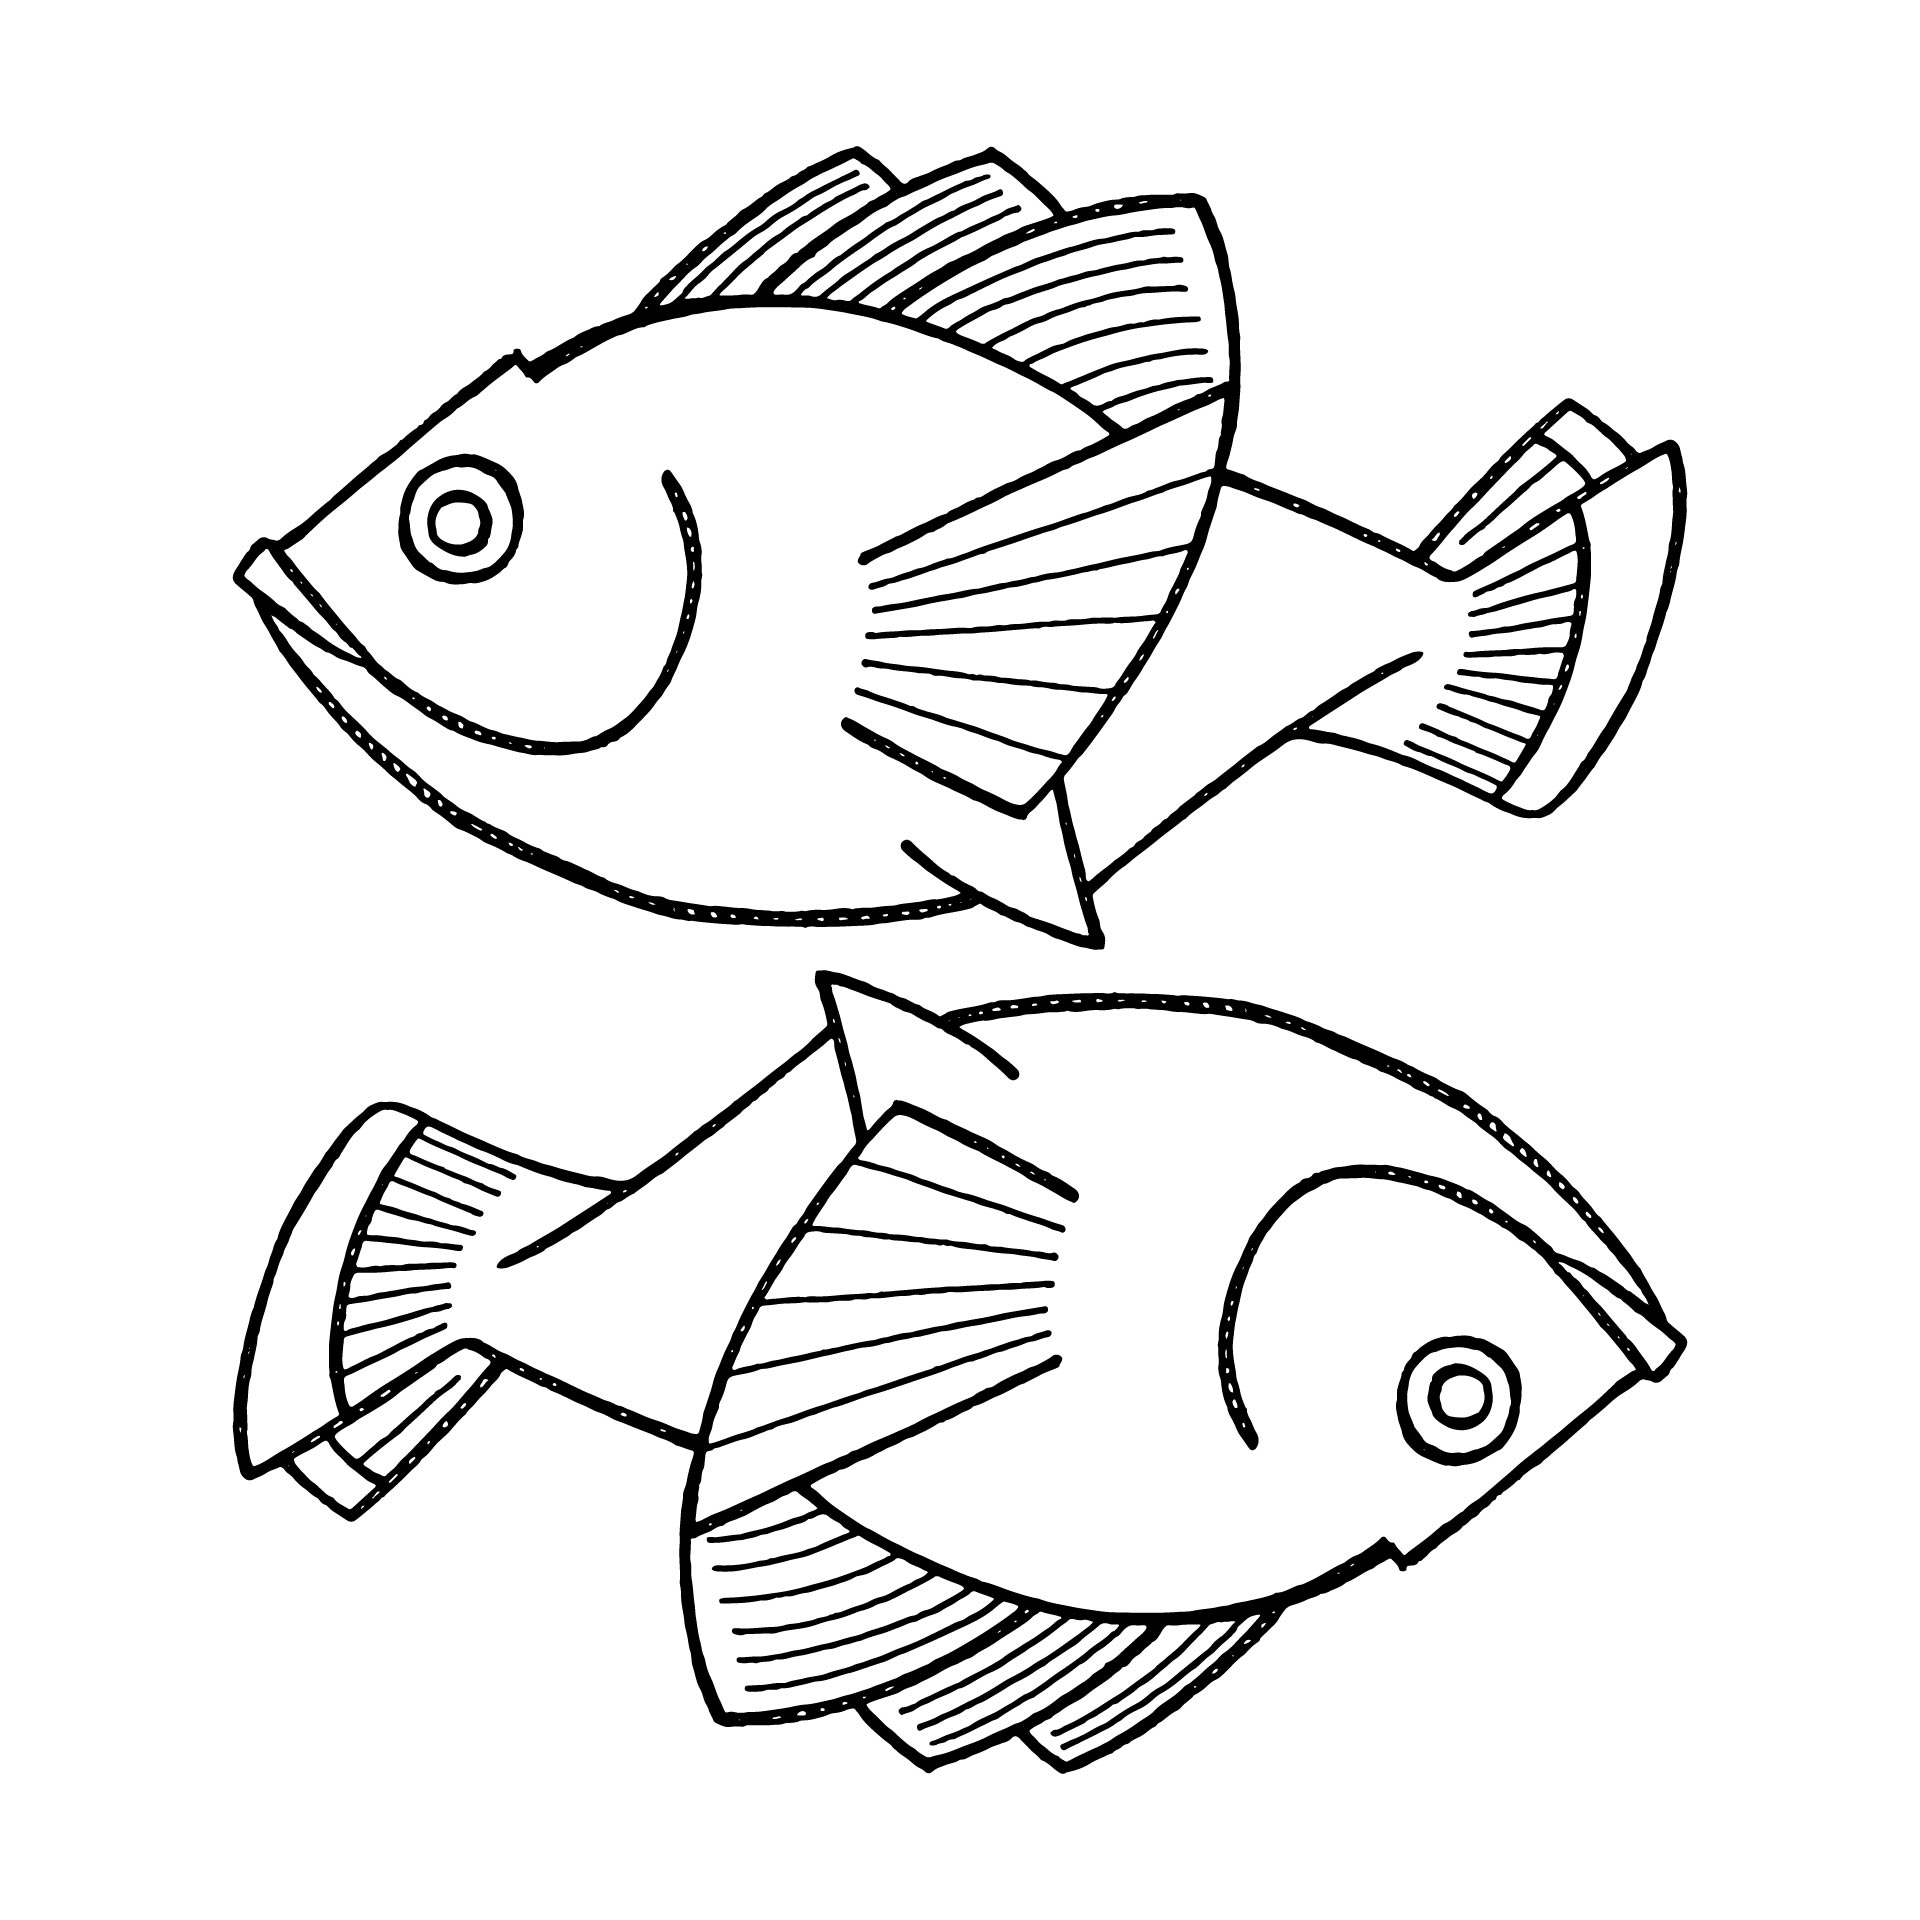 6-best-images-of-printable-fish-pattern-printable-fish-outline